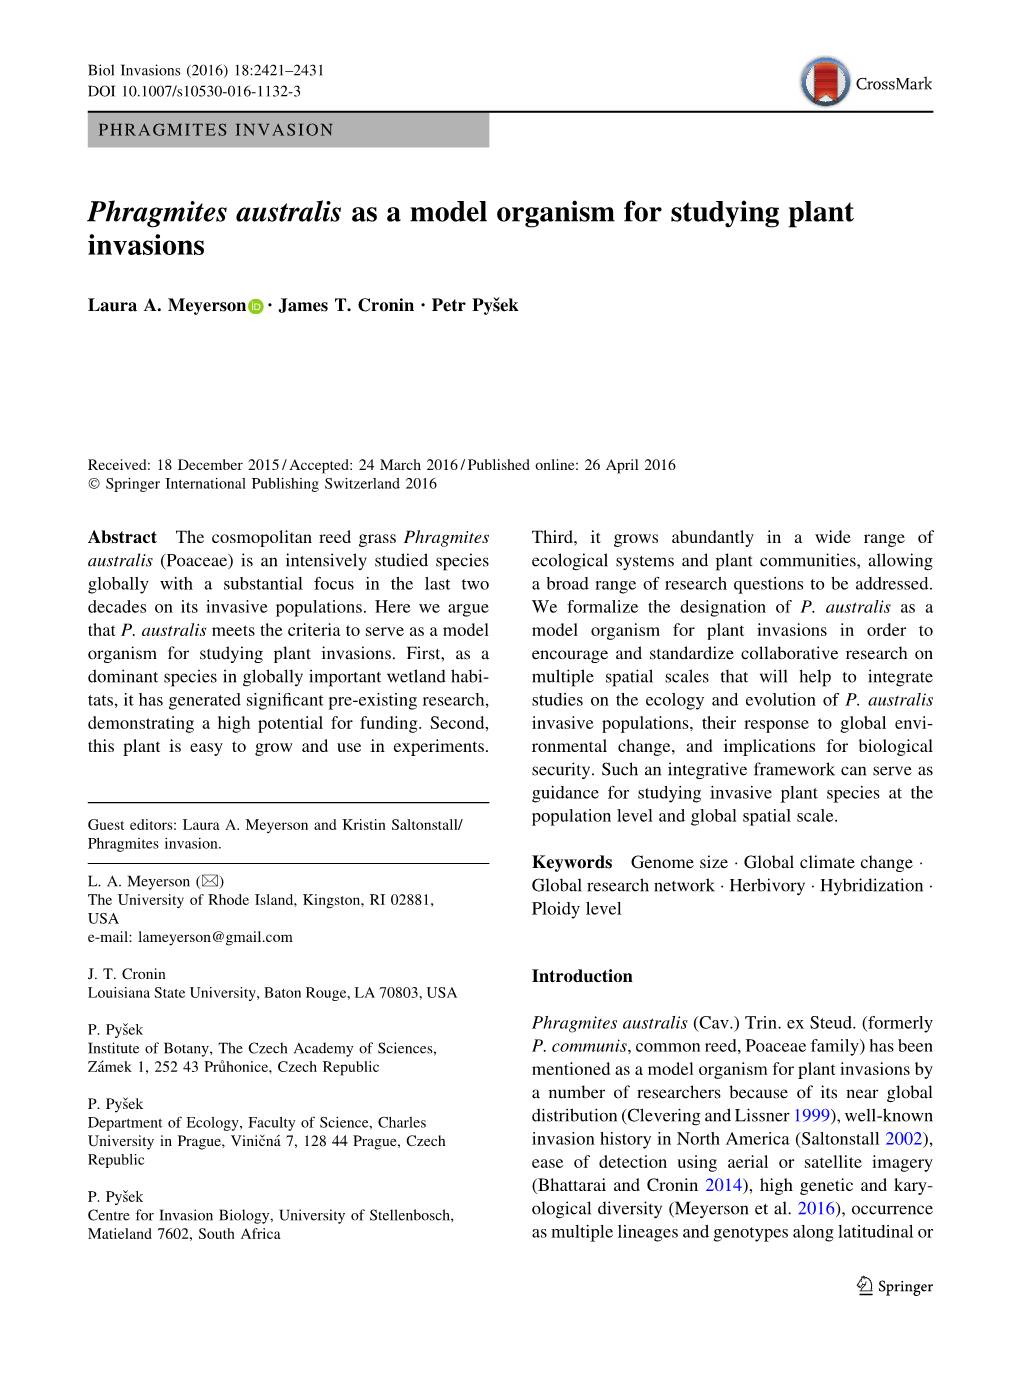 Phragmites Australis As a Model Organism for Studying Plant Invasions